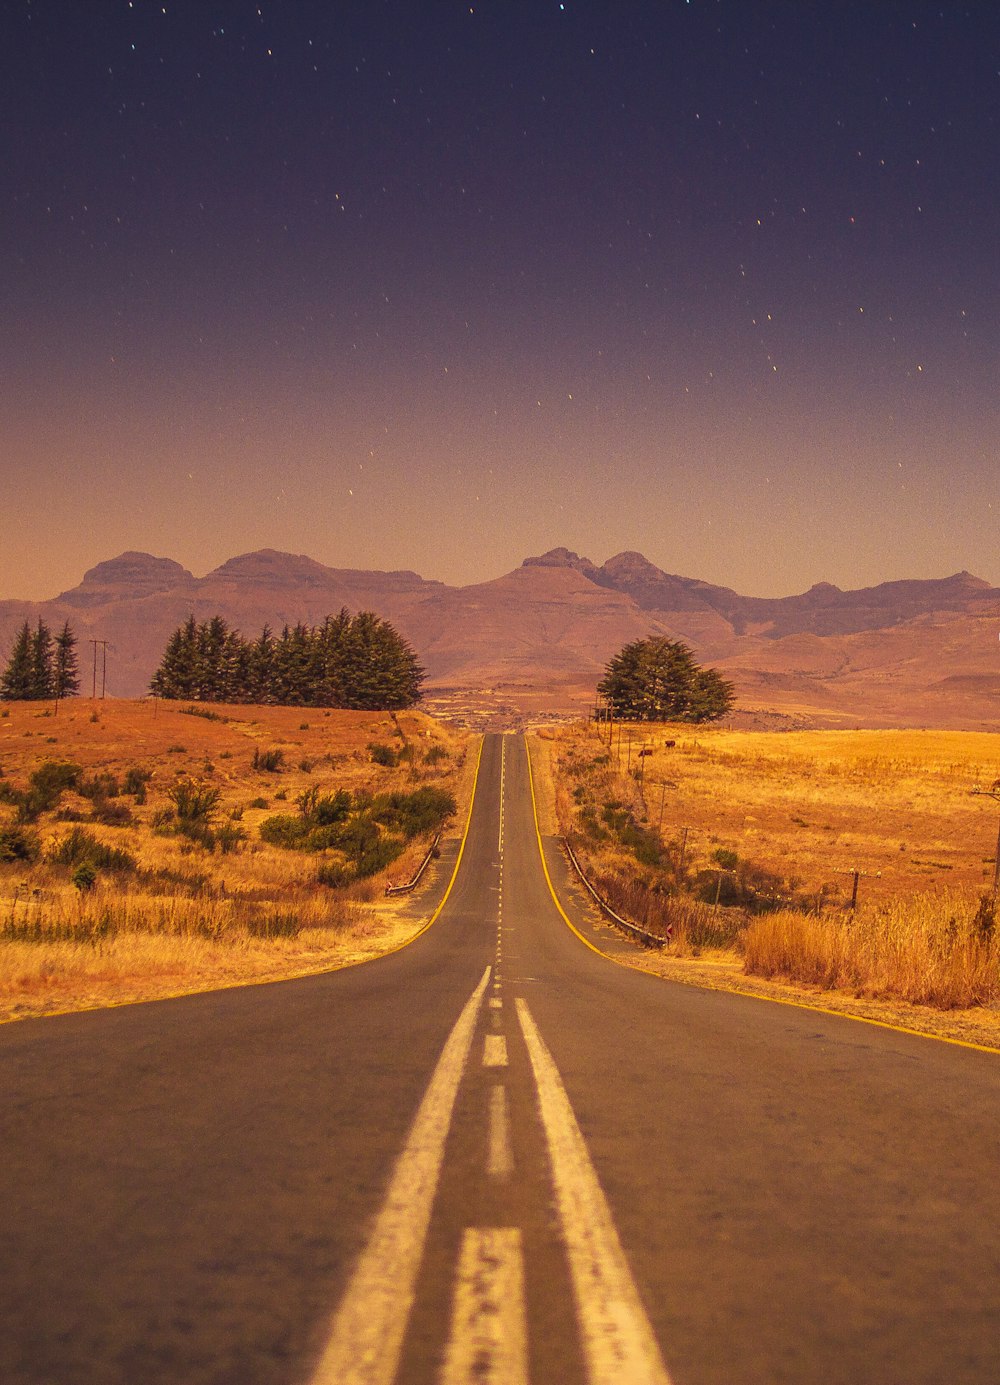 view of a long empty road photo – Free Road Image on Unsplash